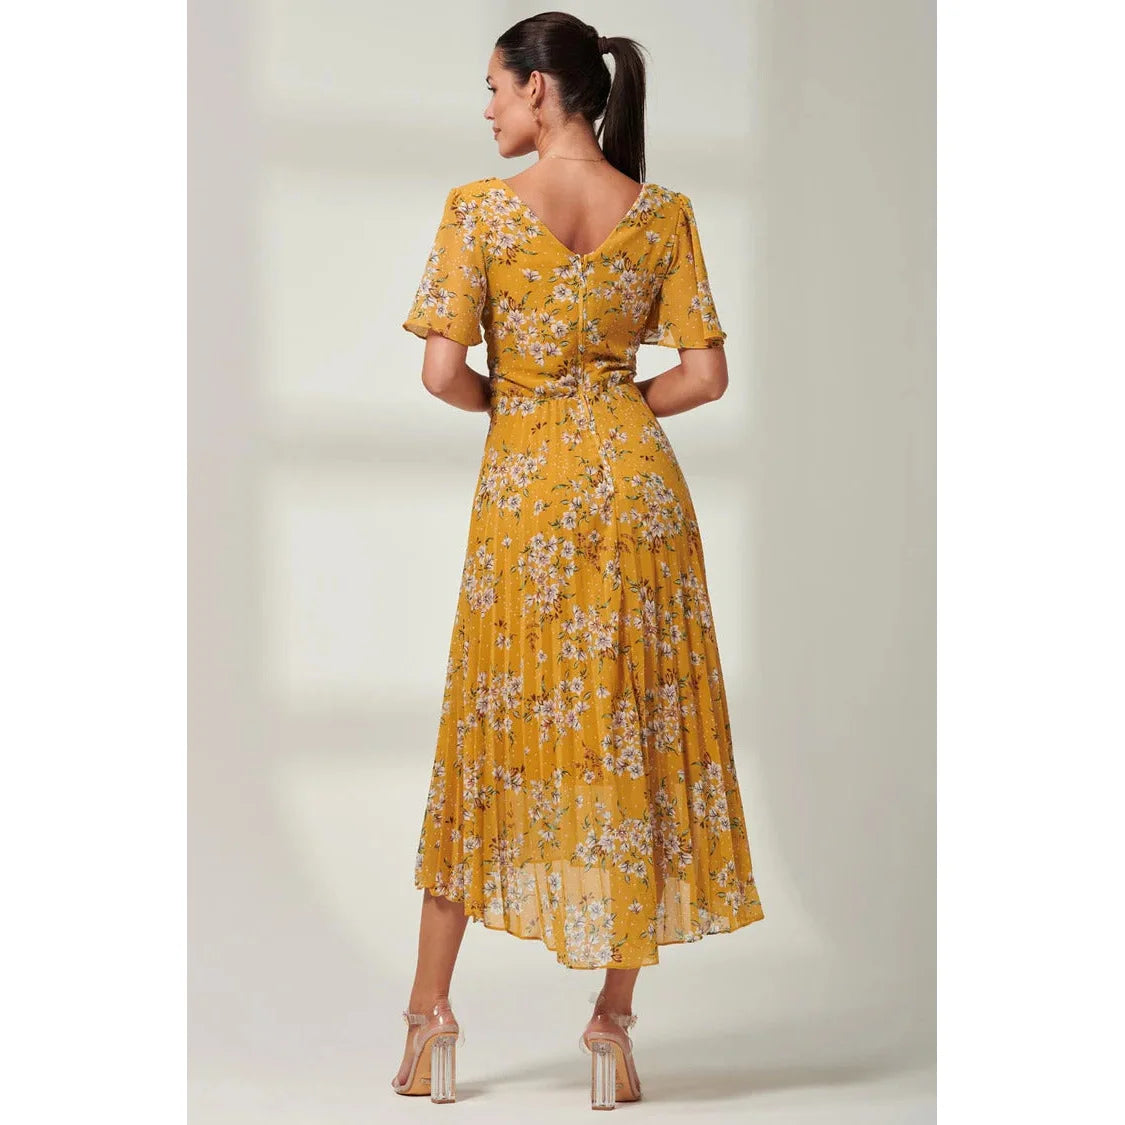 Jolie Moi Mustard Yellow Floral Print Pleated Dress With Angel Sleeves